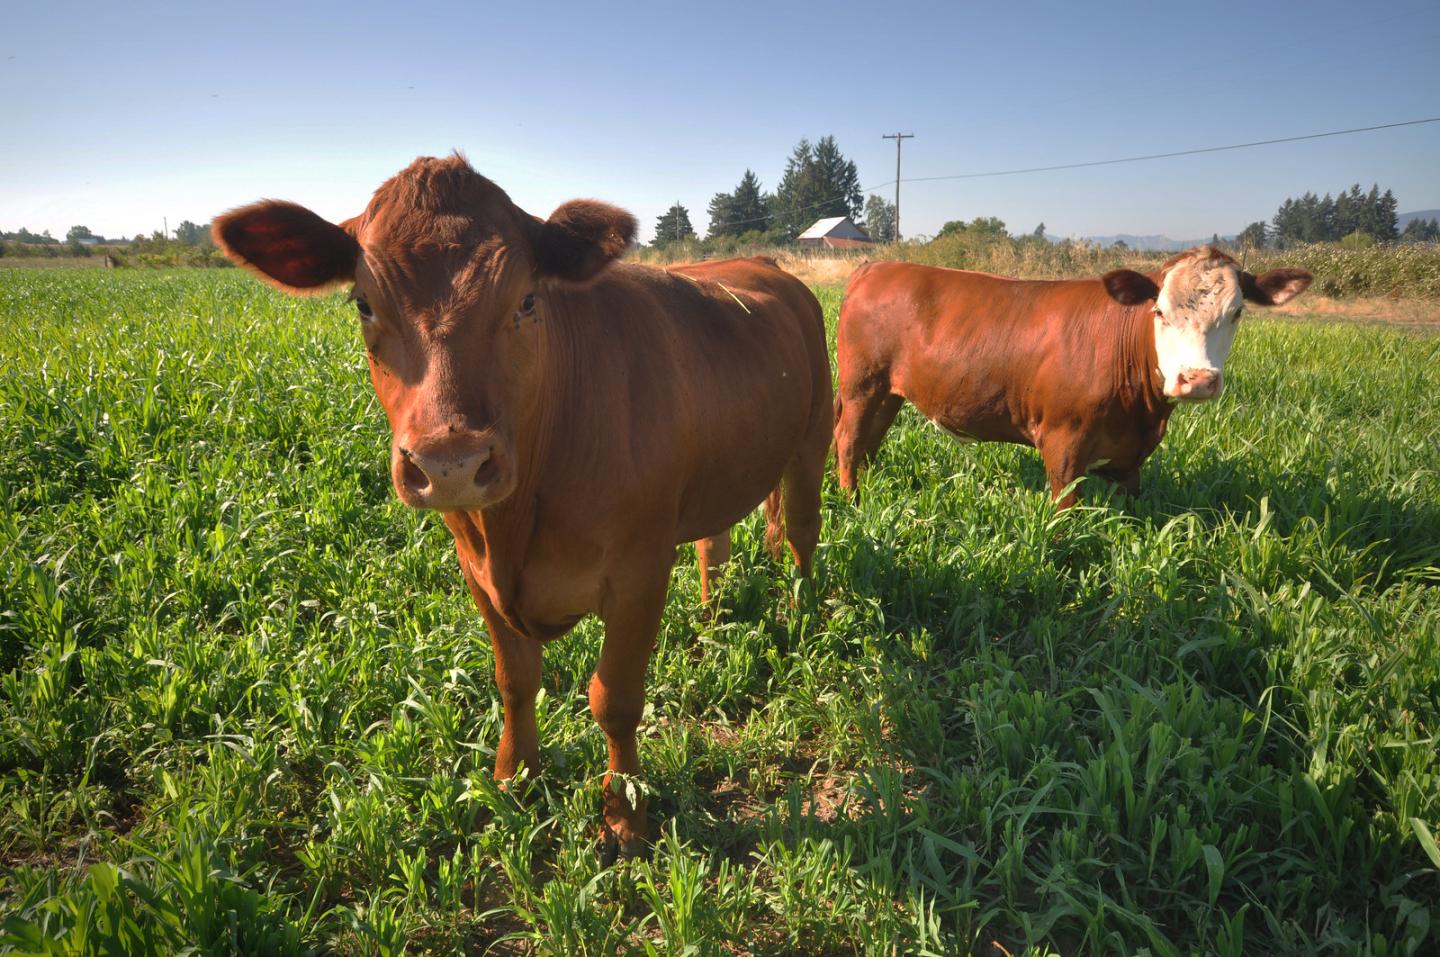 To build soil health, cattle graze cover crops on land not currently in vegetable production at Square Peg Farm, which is a certified organic produce farm located near Forest Grove, Oregon.